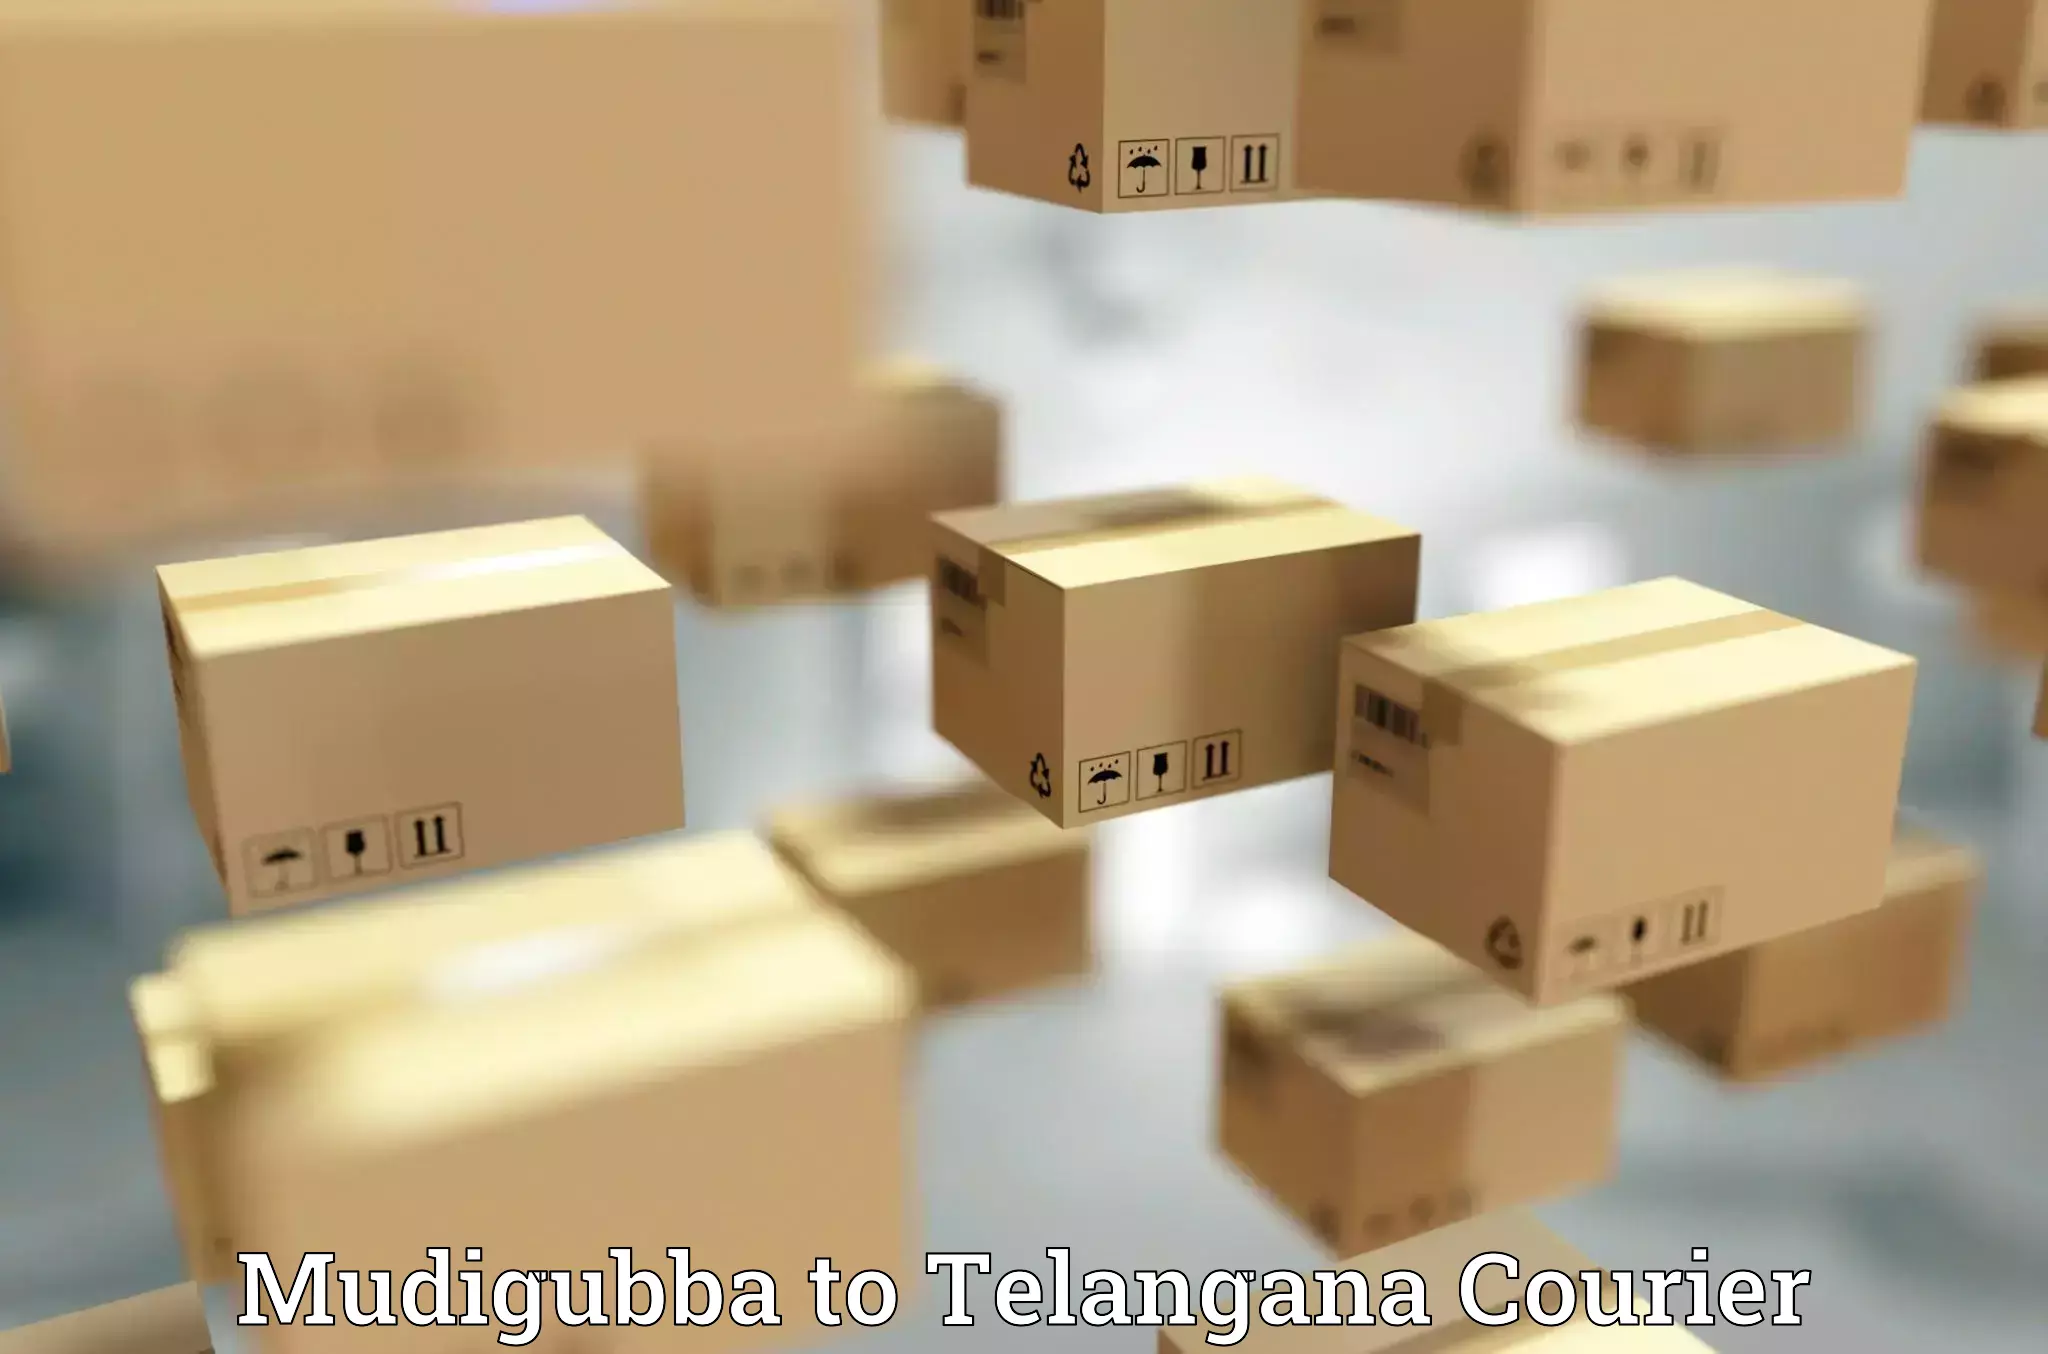 Tech-enabled shipping in Mudigubba to Tadvai